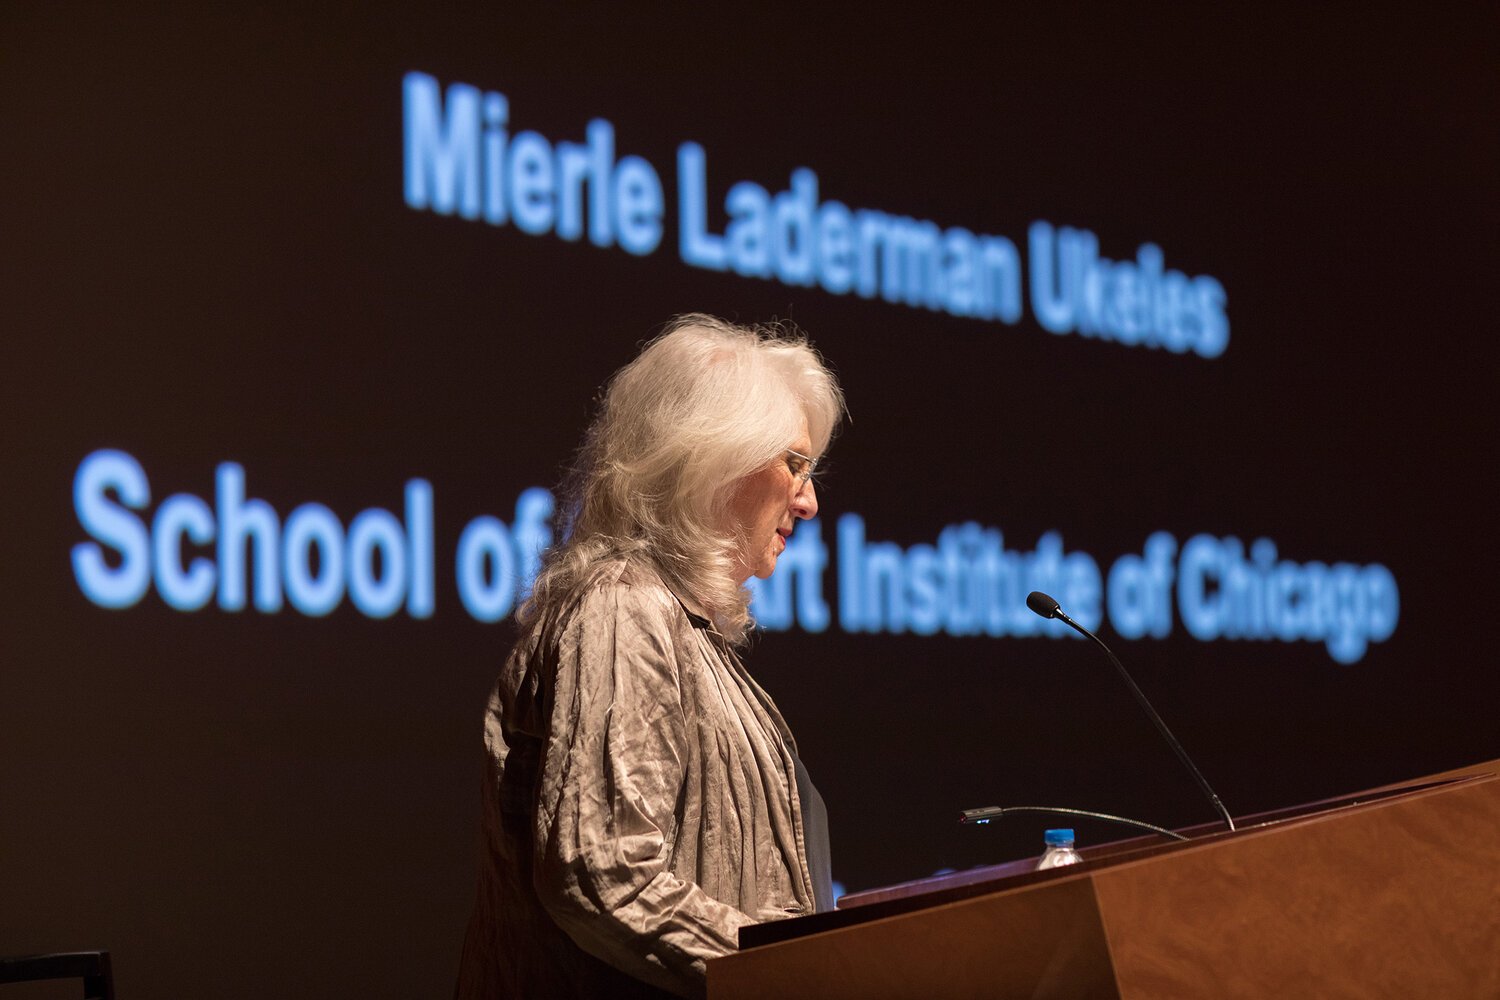  Visiting Artists Program Lecture: Mierle Laderman Ukeles, The Art Institute of Chicago, Rubloff Auditorium, 2019. 